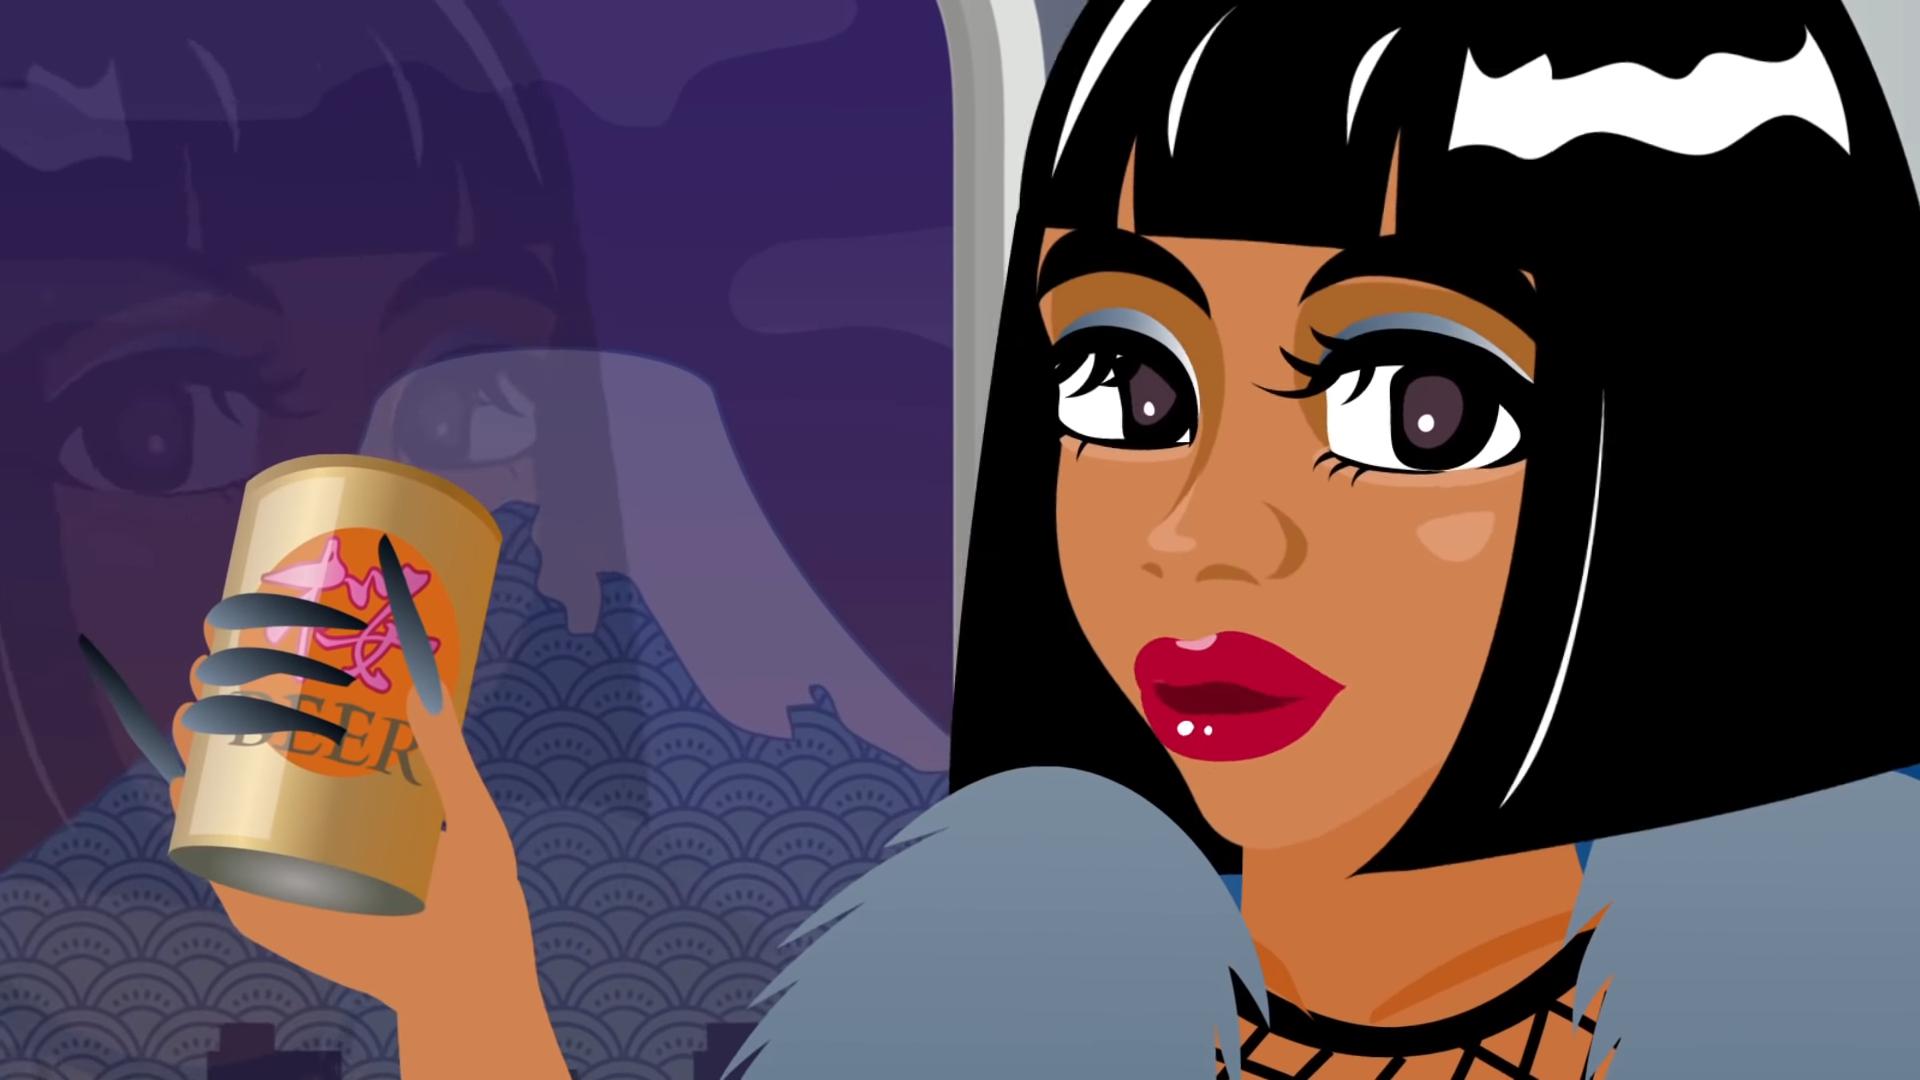 Cardi B has a new anime video for “I Like It.”